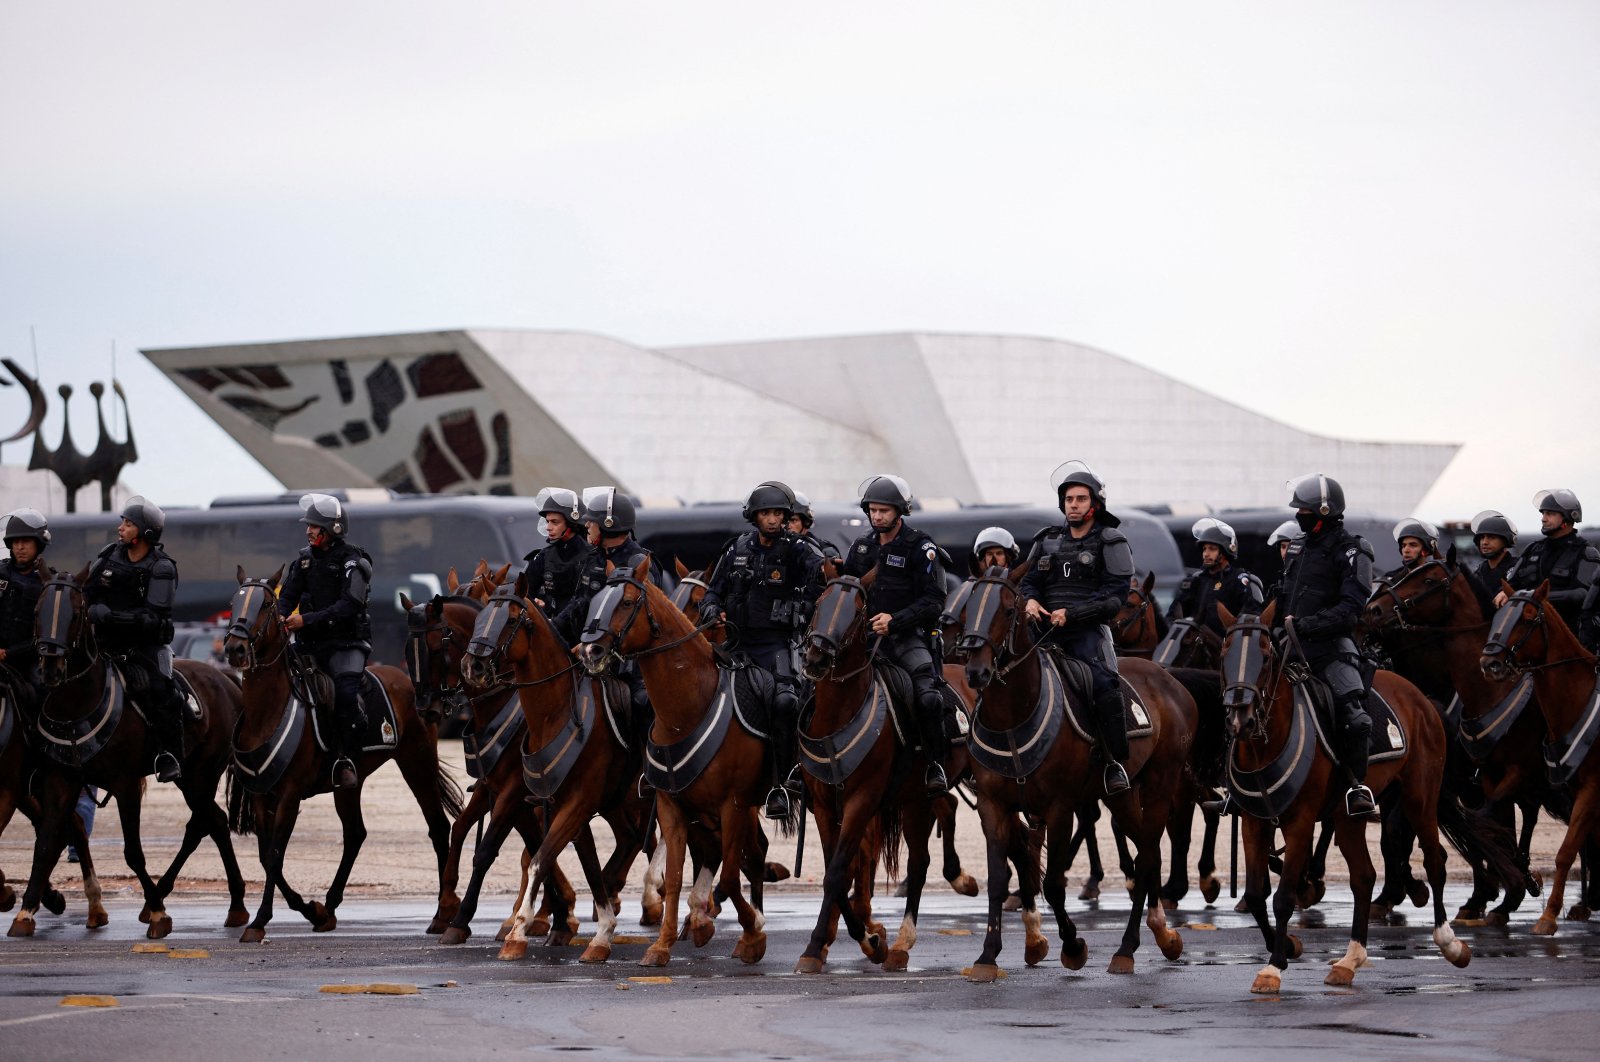 Mounted security forces stand guard outside the Planalto Palace, Brasilia, Brazil, Jan. 11, 2023. (Reuters Photo)